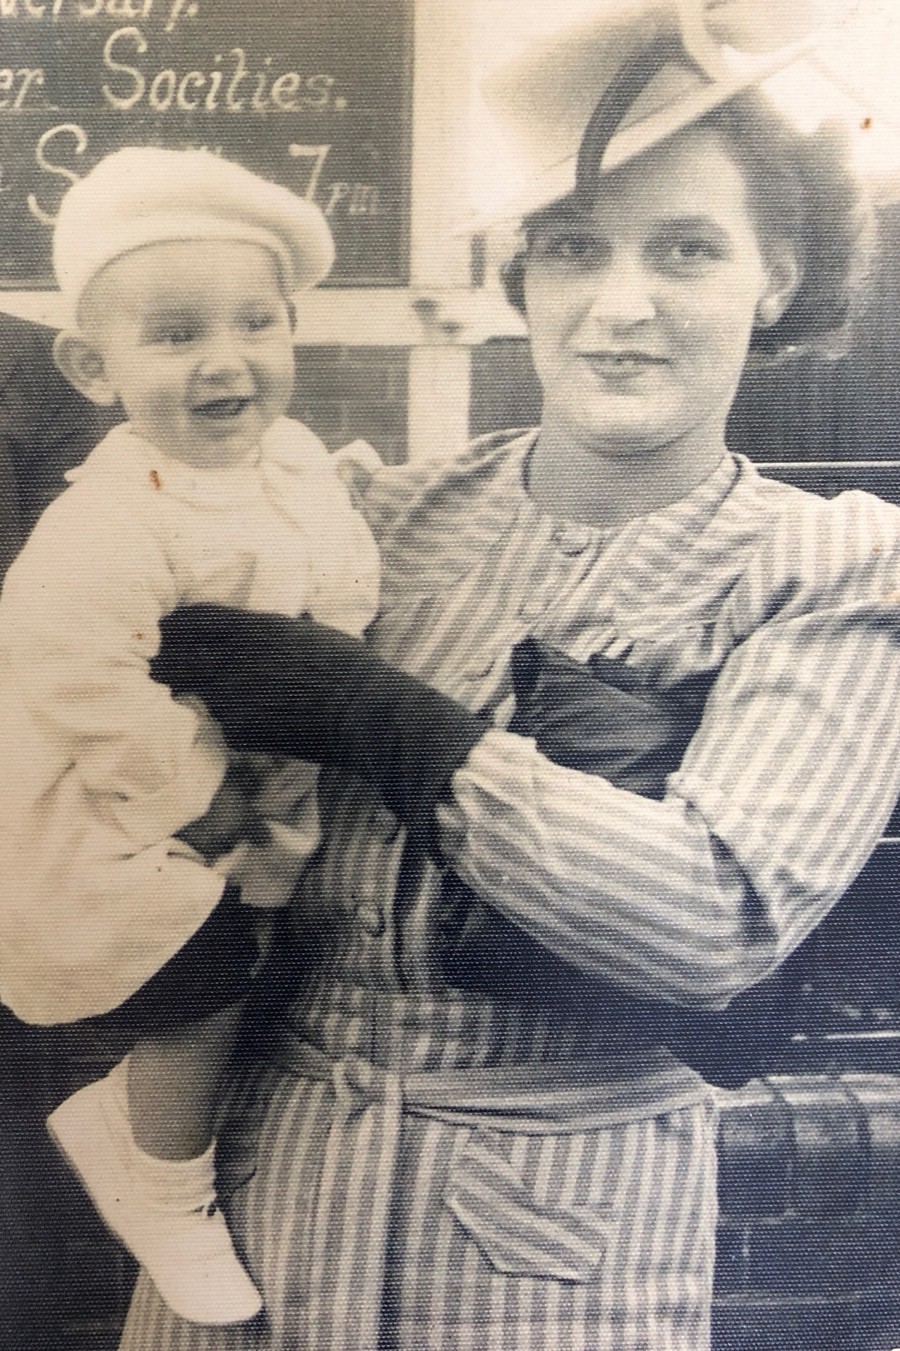 Doug and his Mum (Alice Maude, sometimes known as Maudy) about 1950